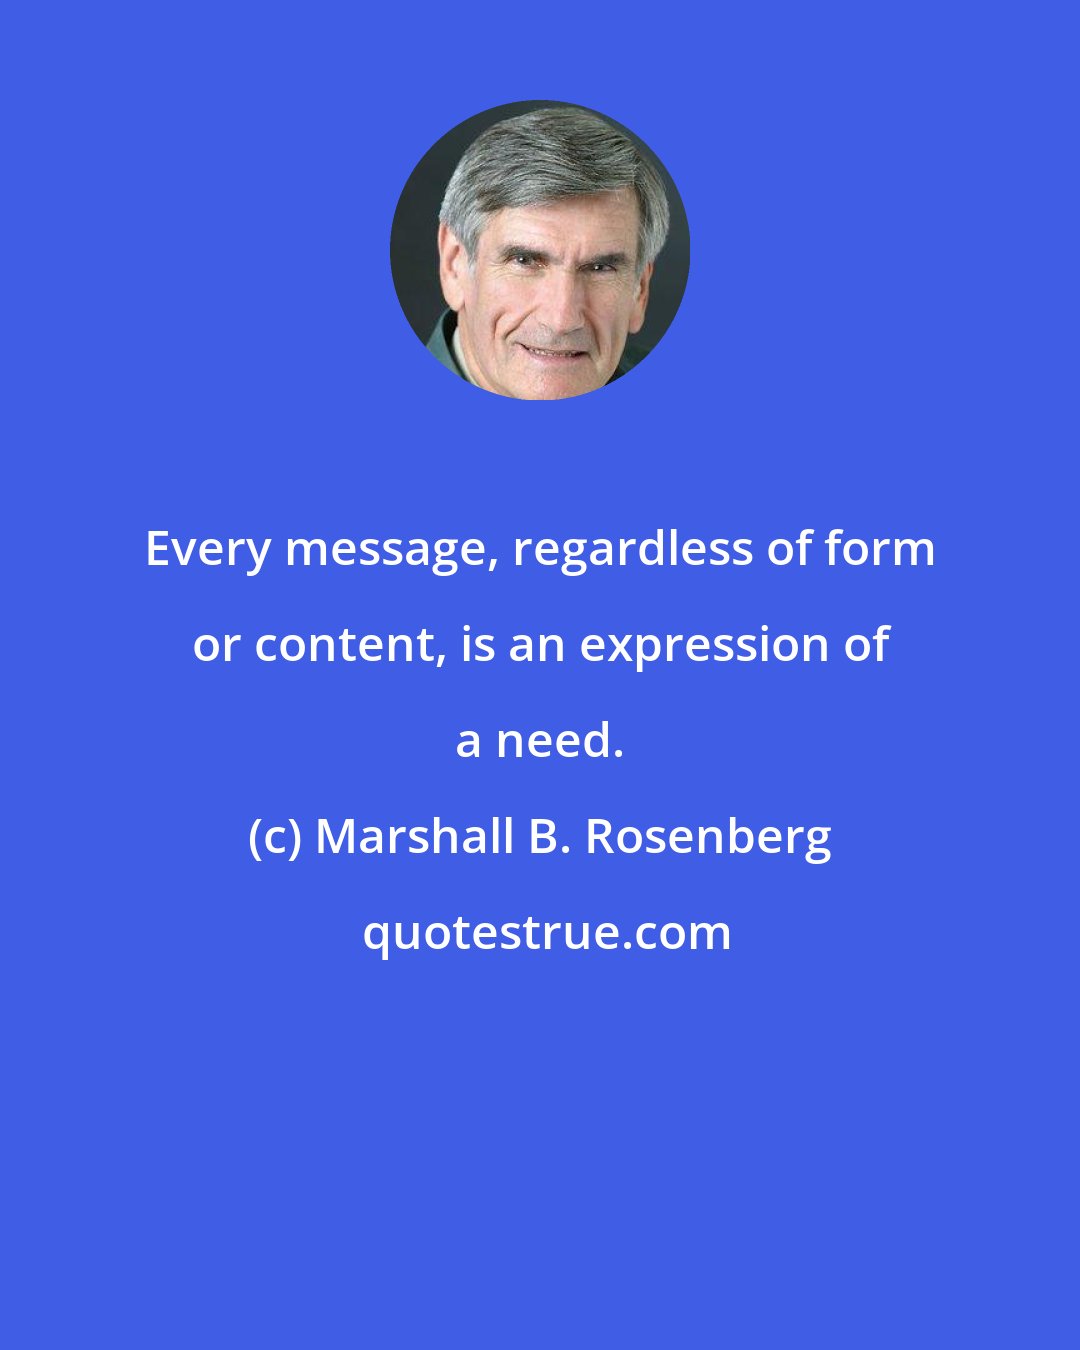 Marshall B. Rosenberg: Every message, regardless of form or content, is an expression of a need.